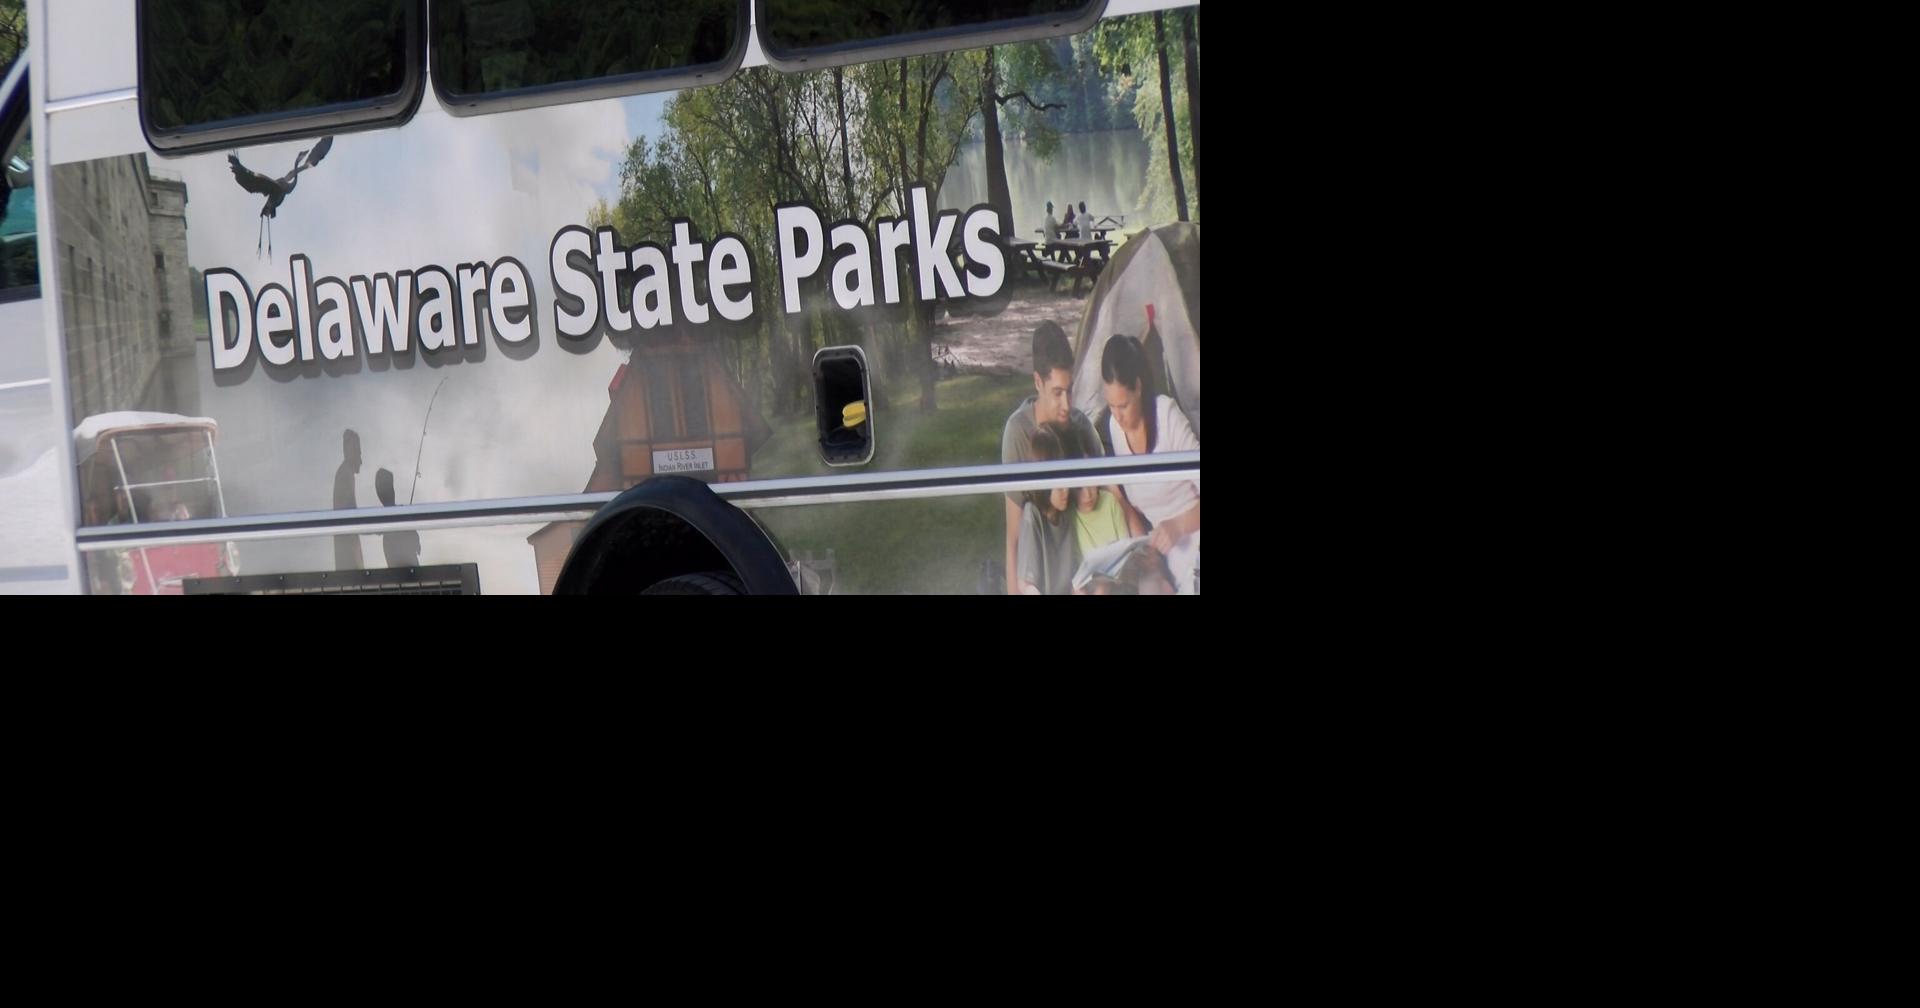 $3.2 Million Grant Going to Delaware State Park Campgrounds